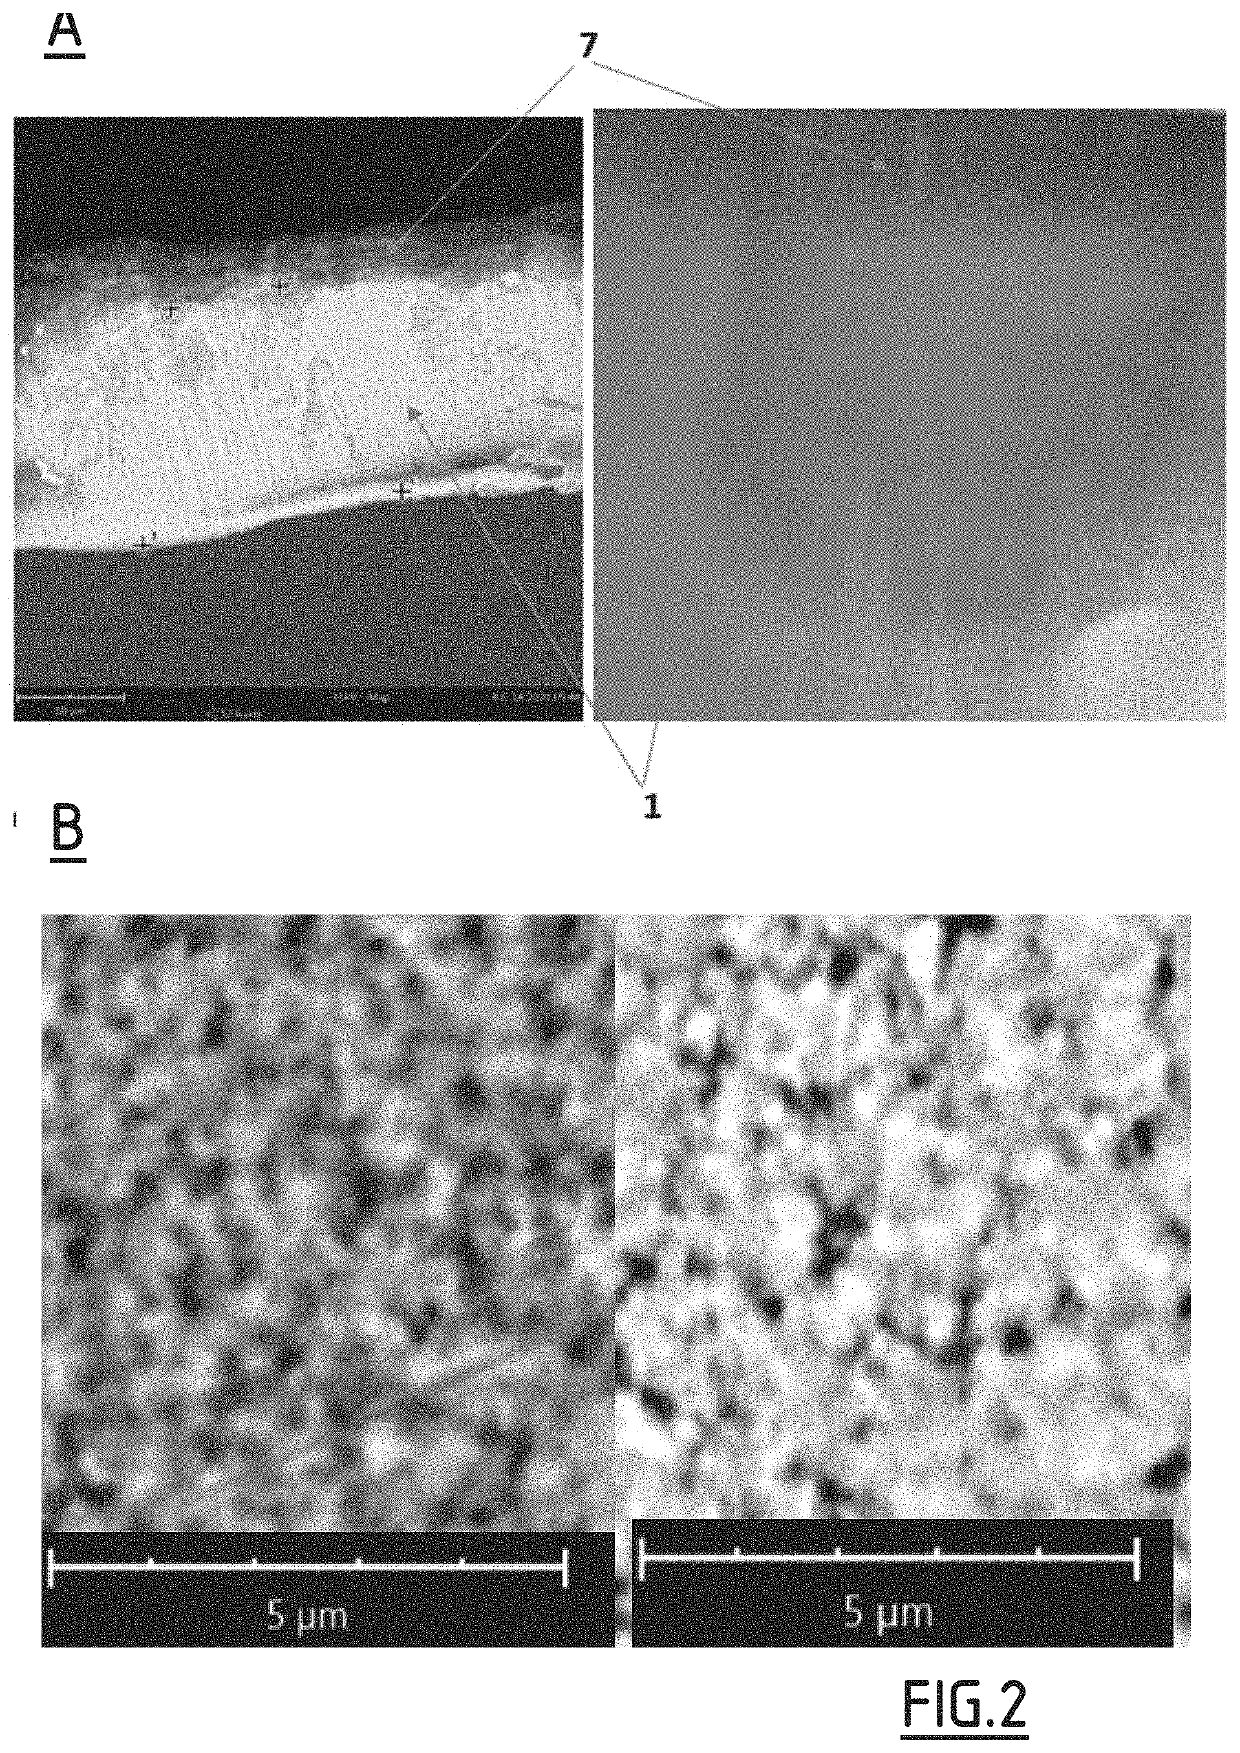 Anti-dendrite negative electrodes, and the electrochemical cells containing them